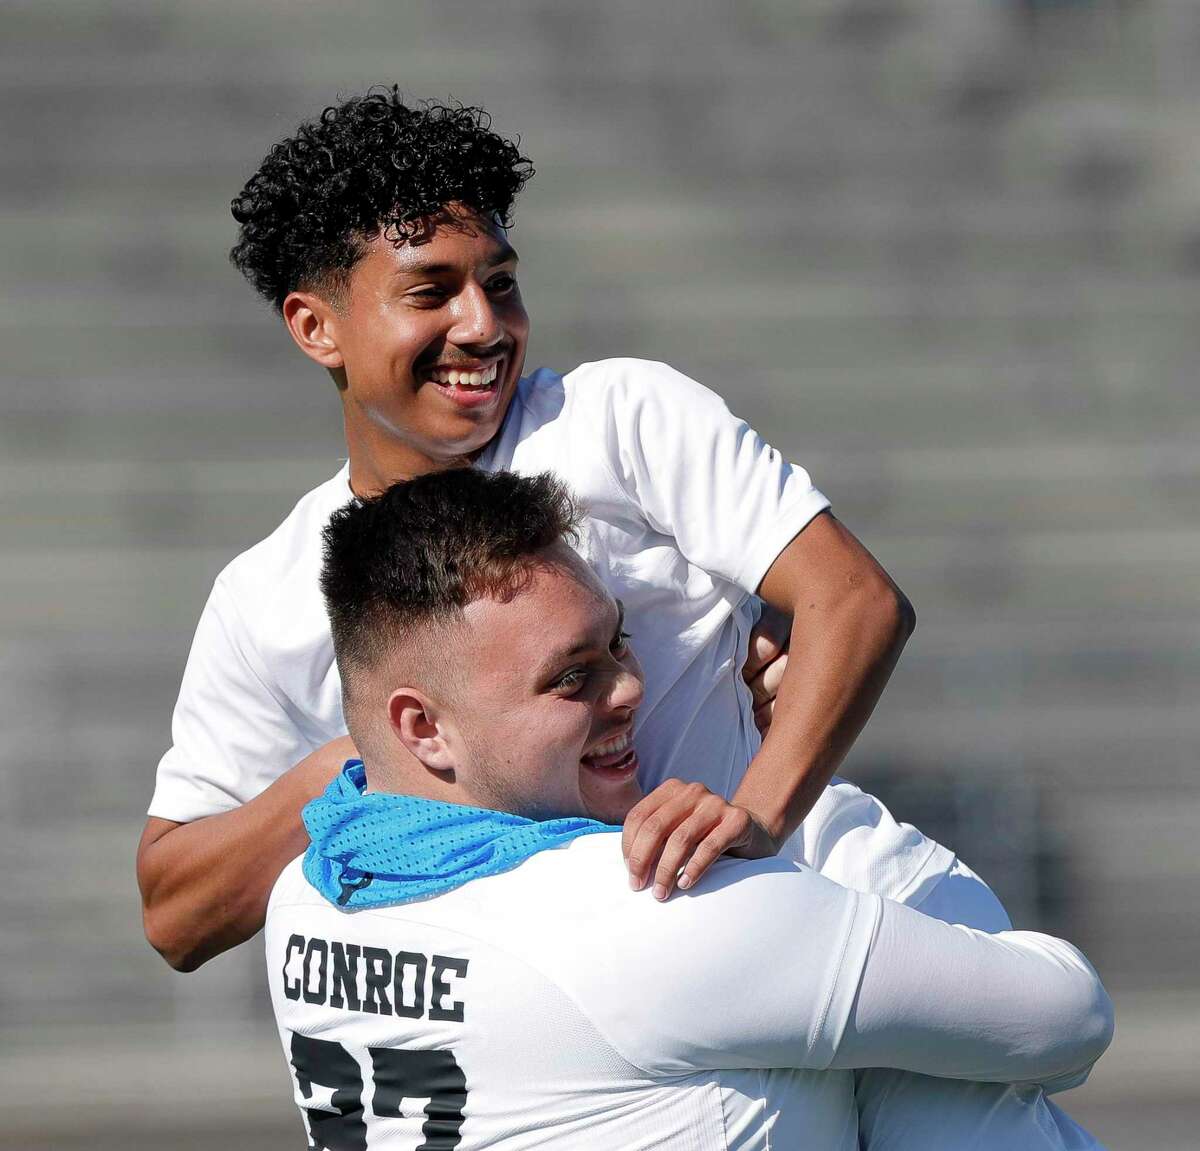 Conroe’s Ulises Quintanilla (7) celebrates his game-winning goals in the 77th minute with Carlos Espinoza in the second period of a high school soccer match at Turner Stadium, Thursday, Jan. 13, 2022, in Humble.